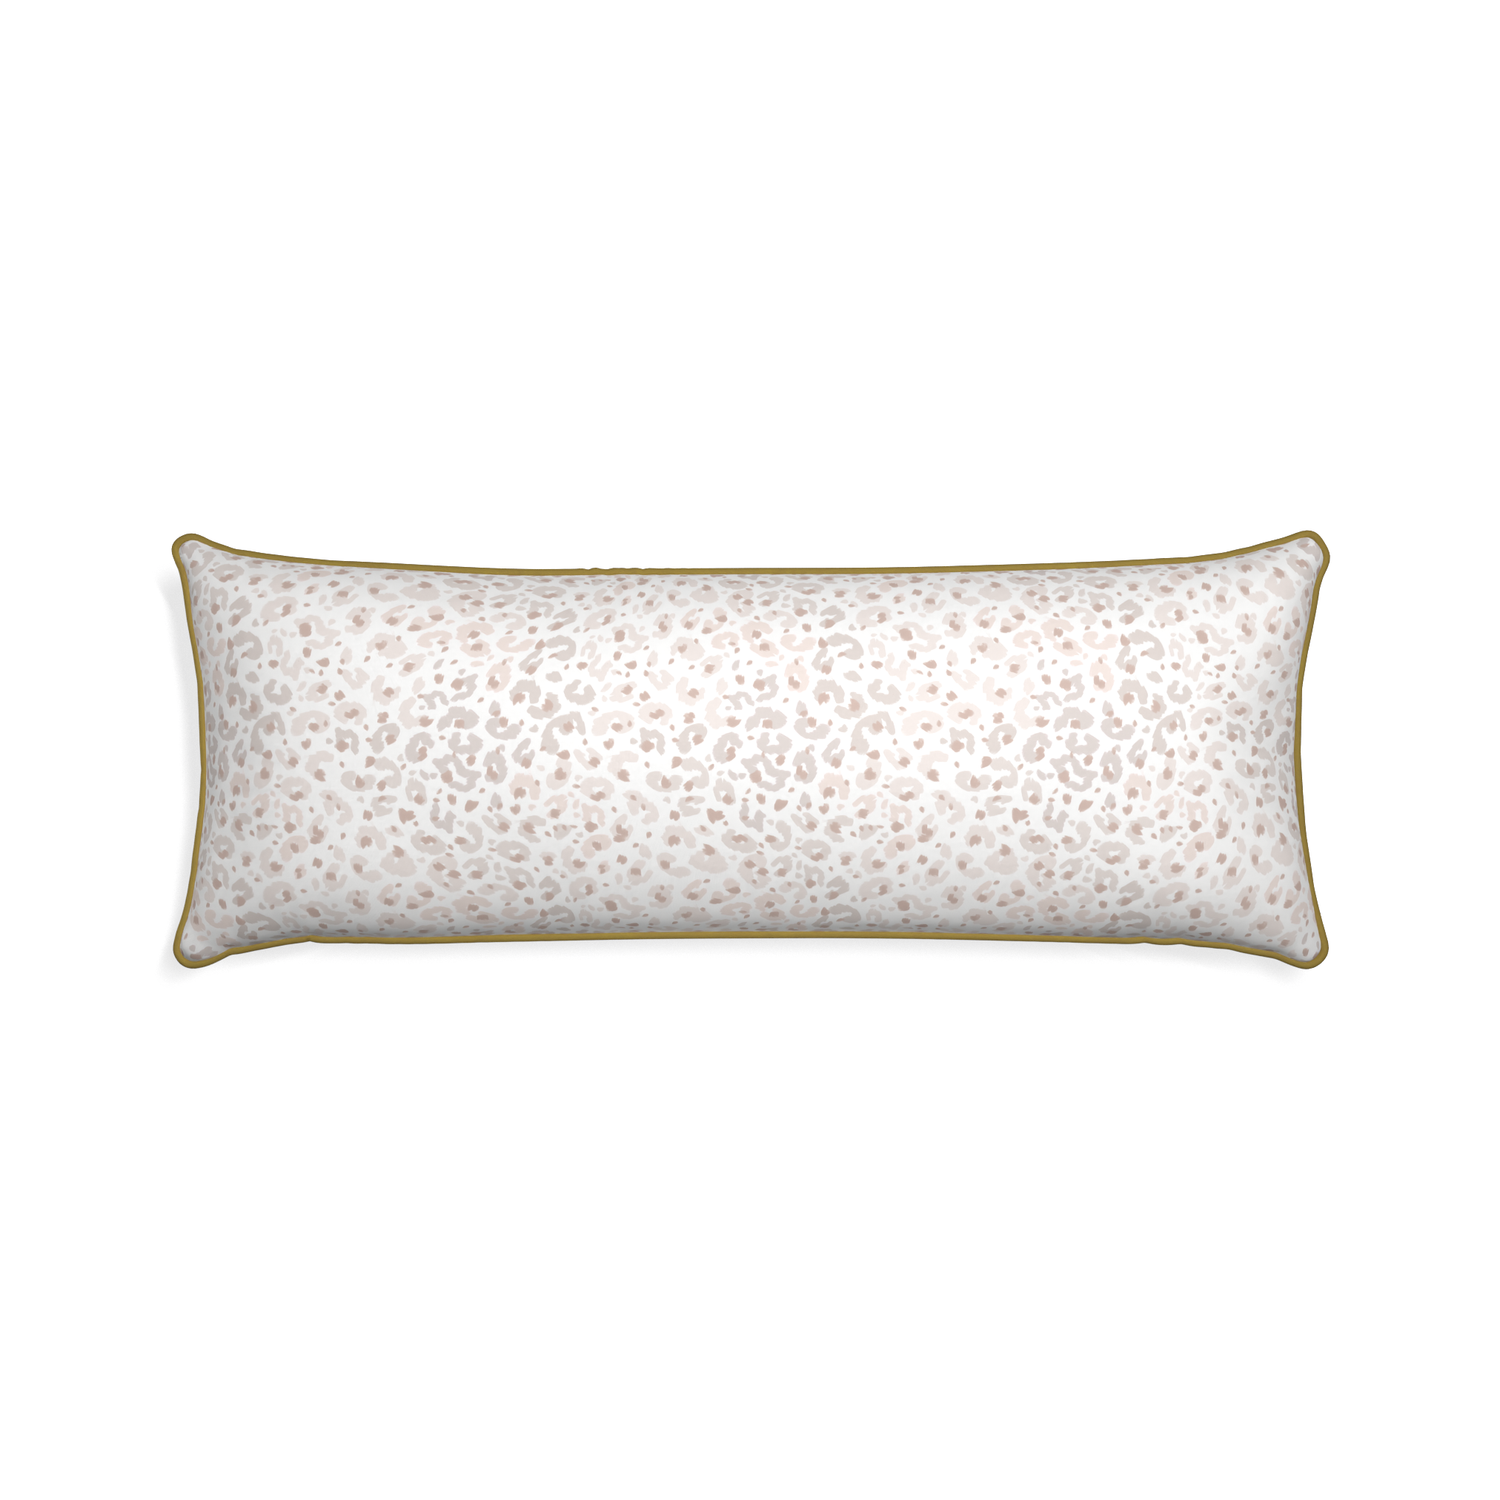 Xl-lumbar rosie custom beige animal printpillow with c piping on white background